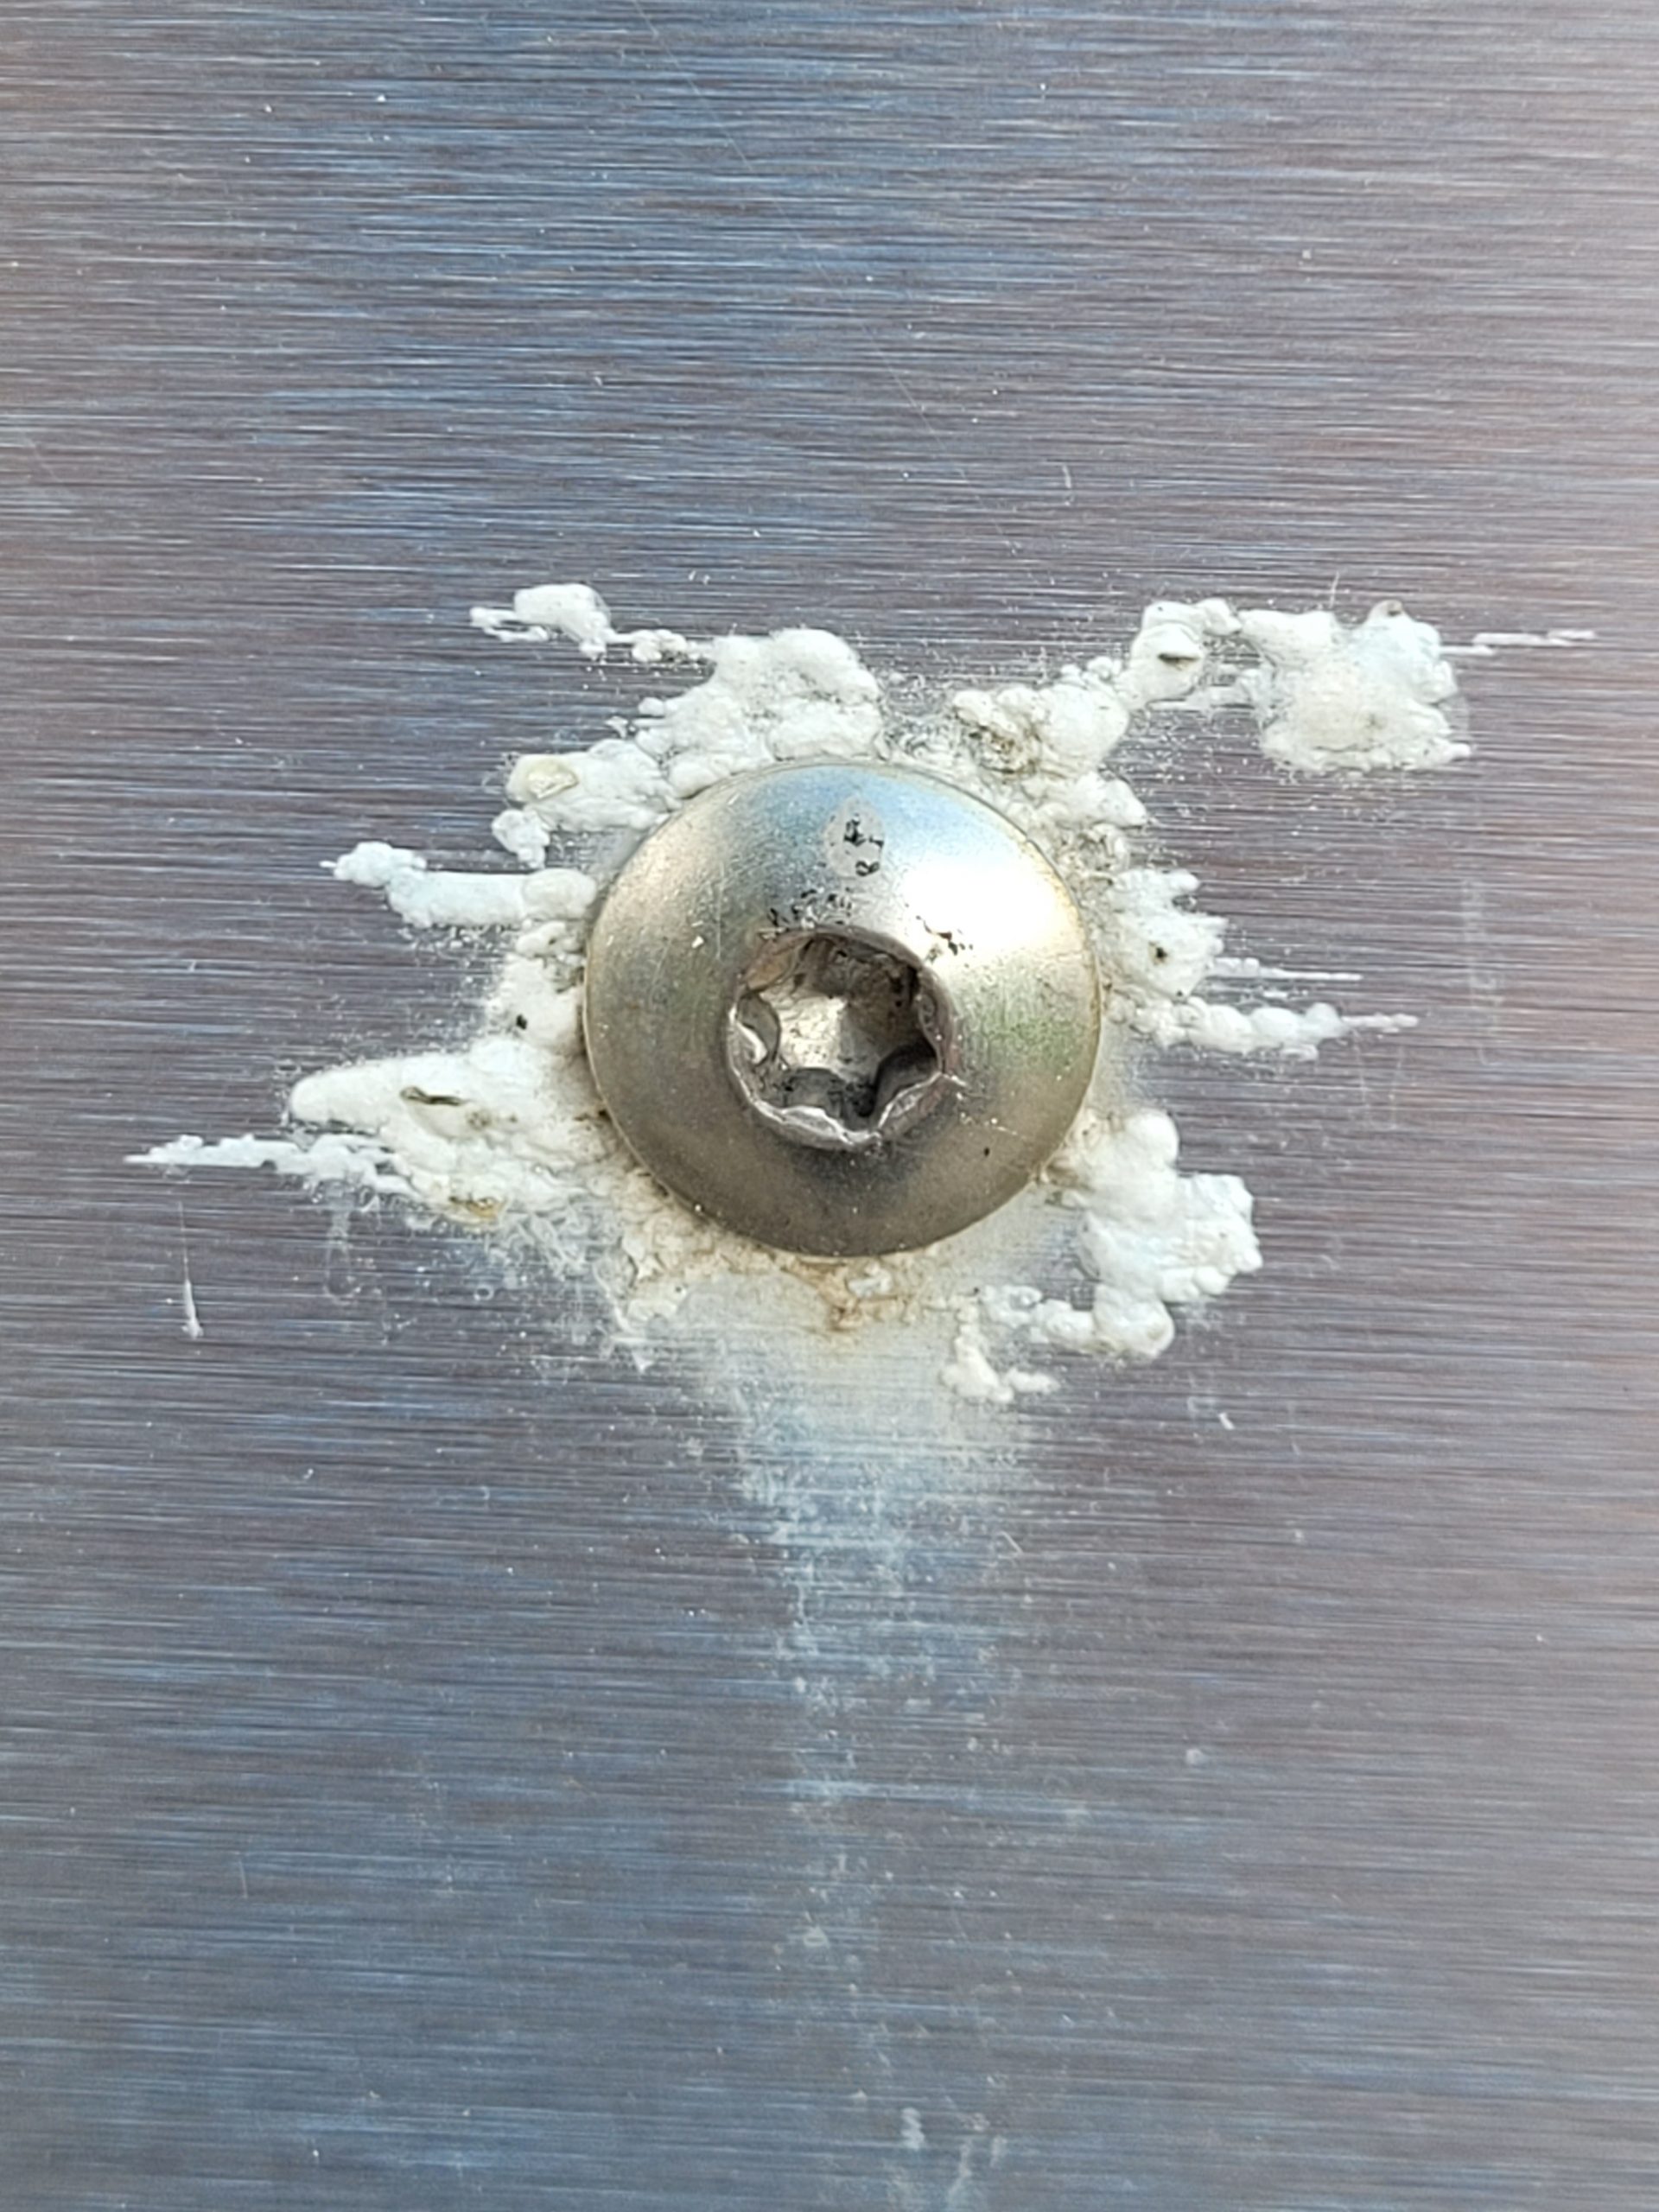 Anodized Aluminum vs Stainless Steel Corrosion: How Are They Different?